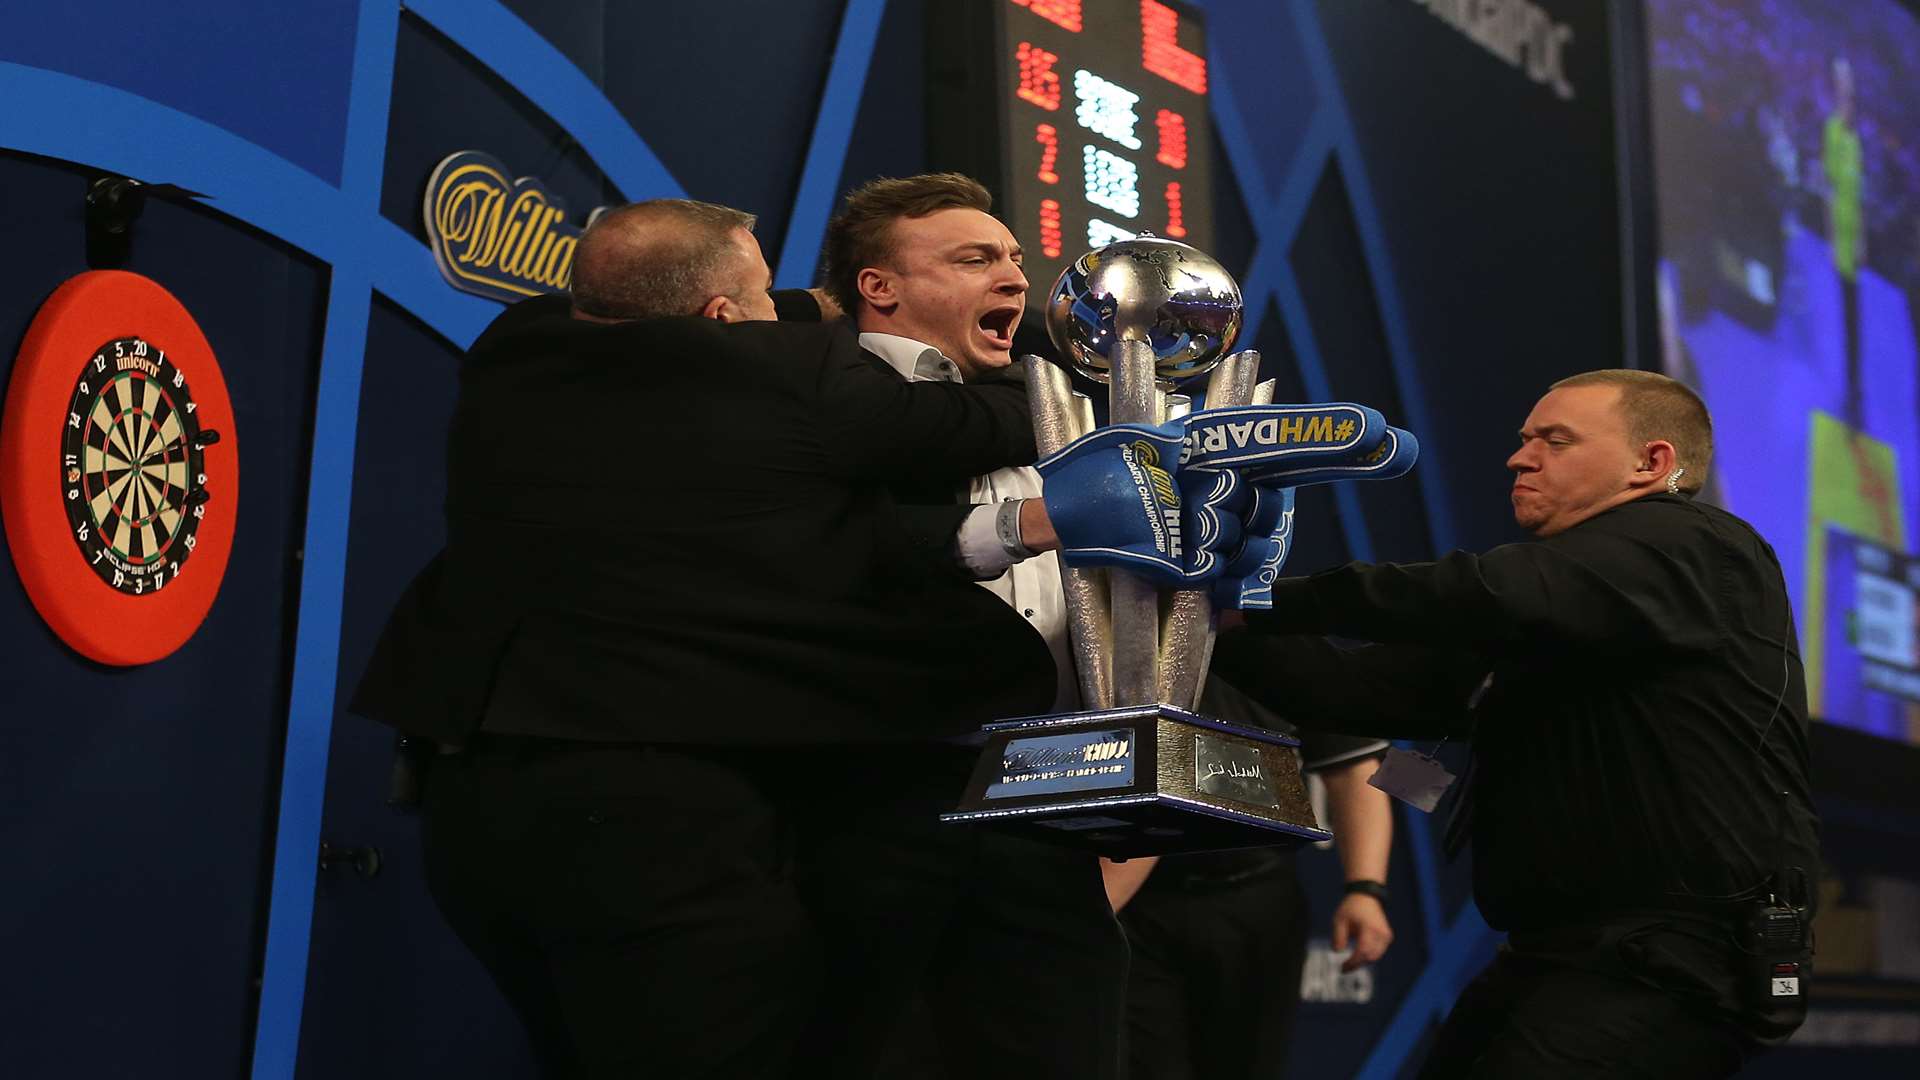 Lee Marshall is tackled by security after invading the stage at the world darts final. Credit: Steve Paston/PA Wire.